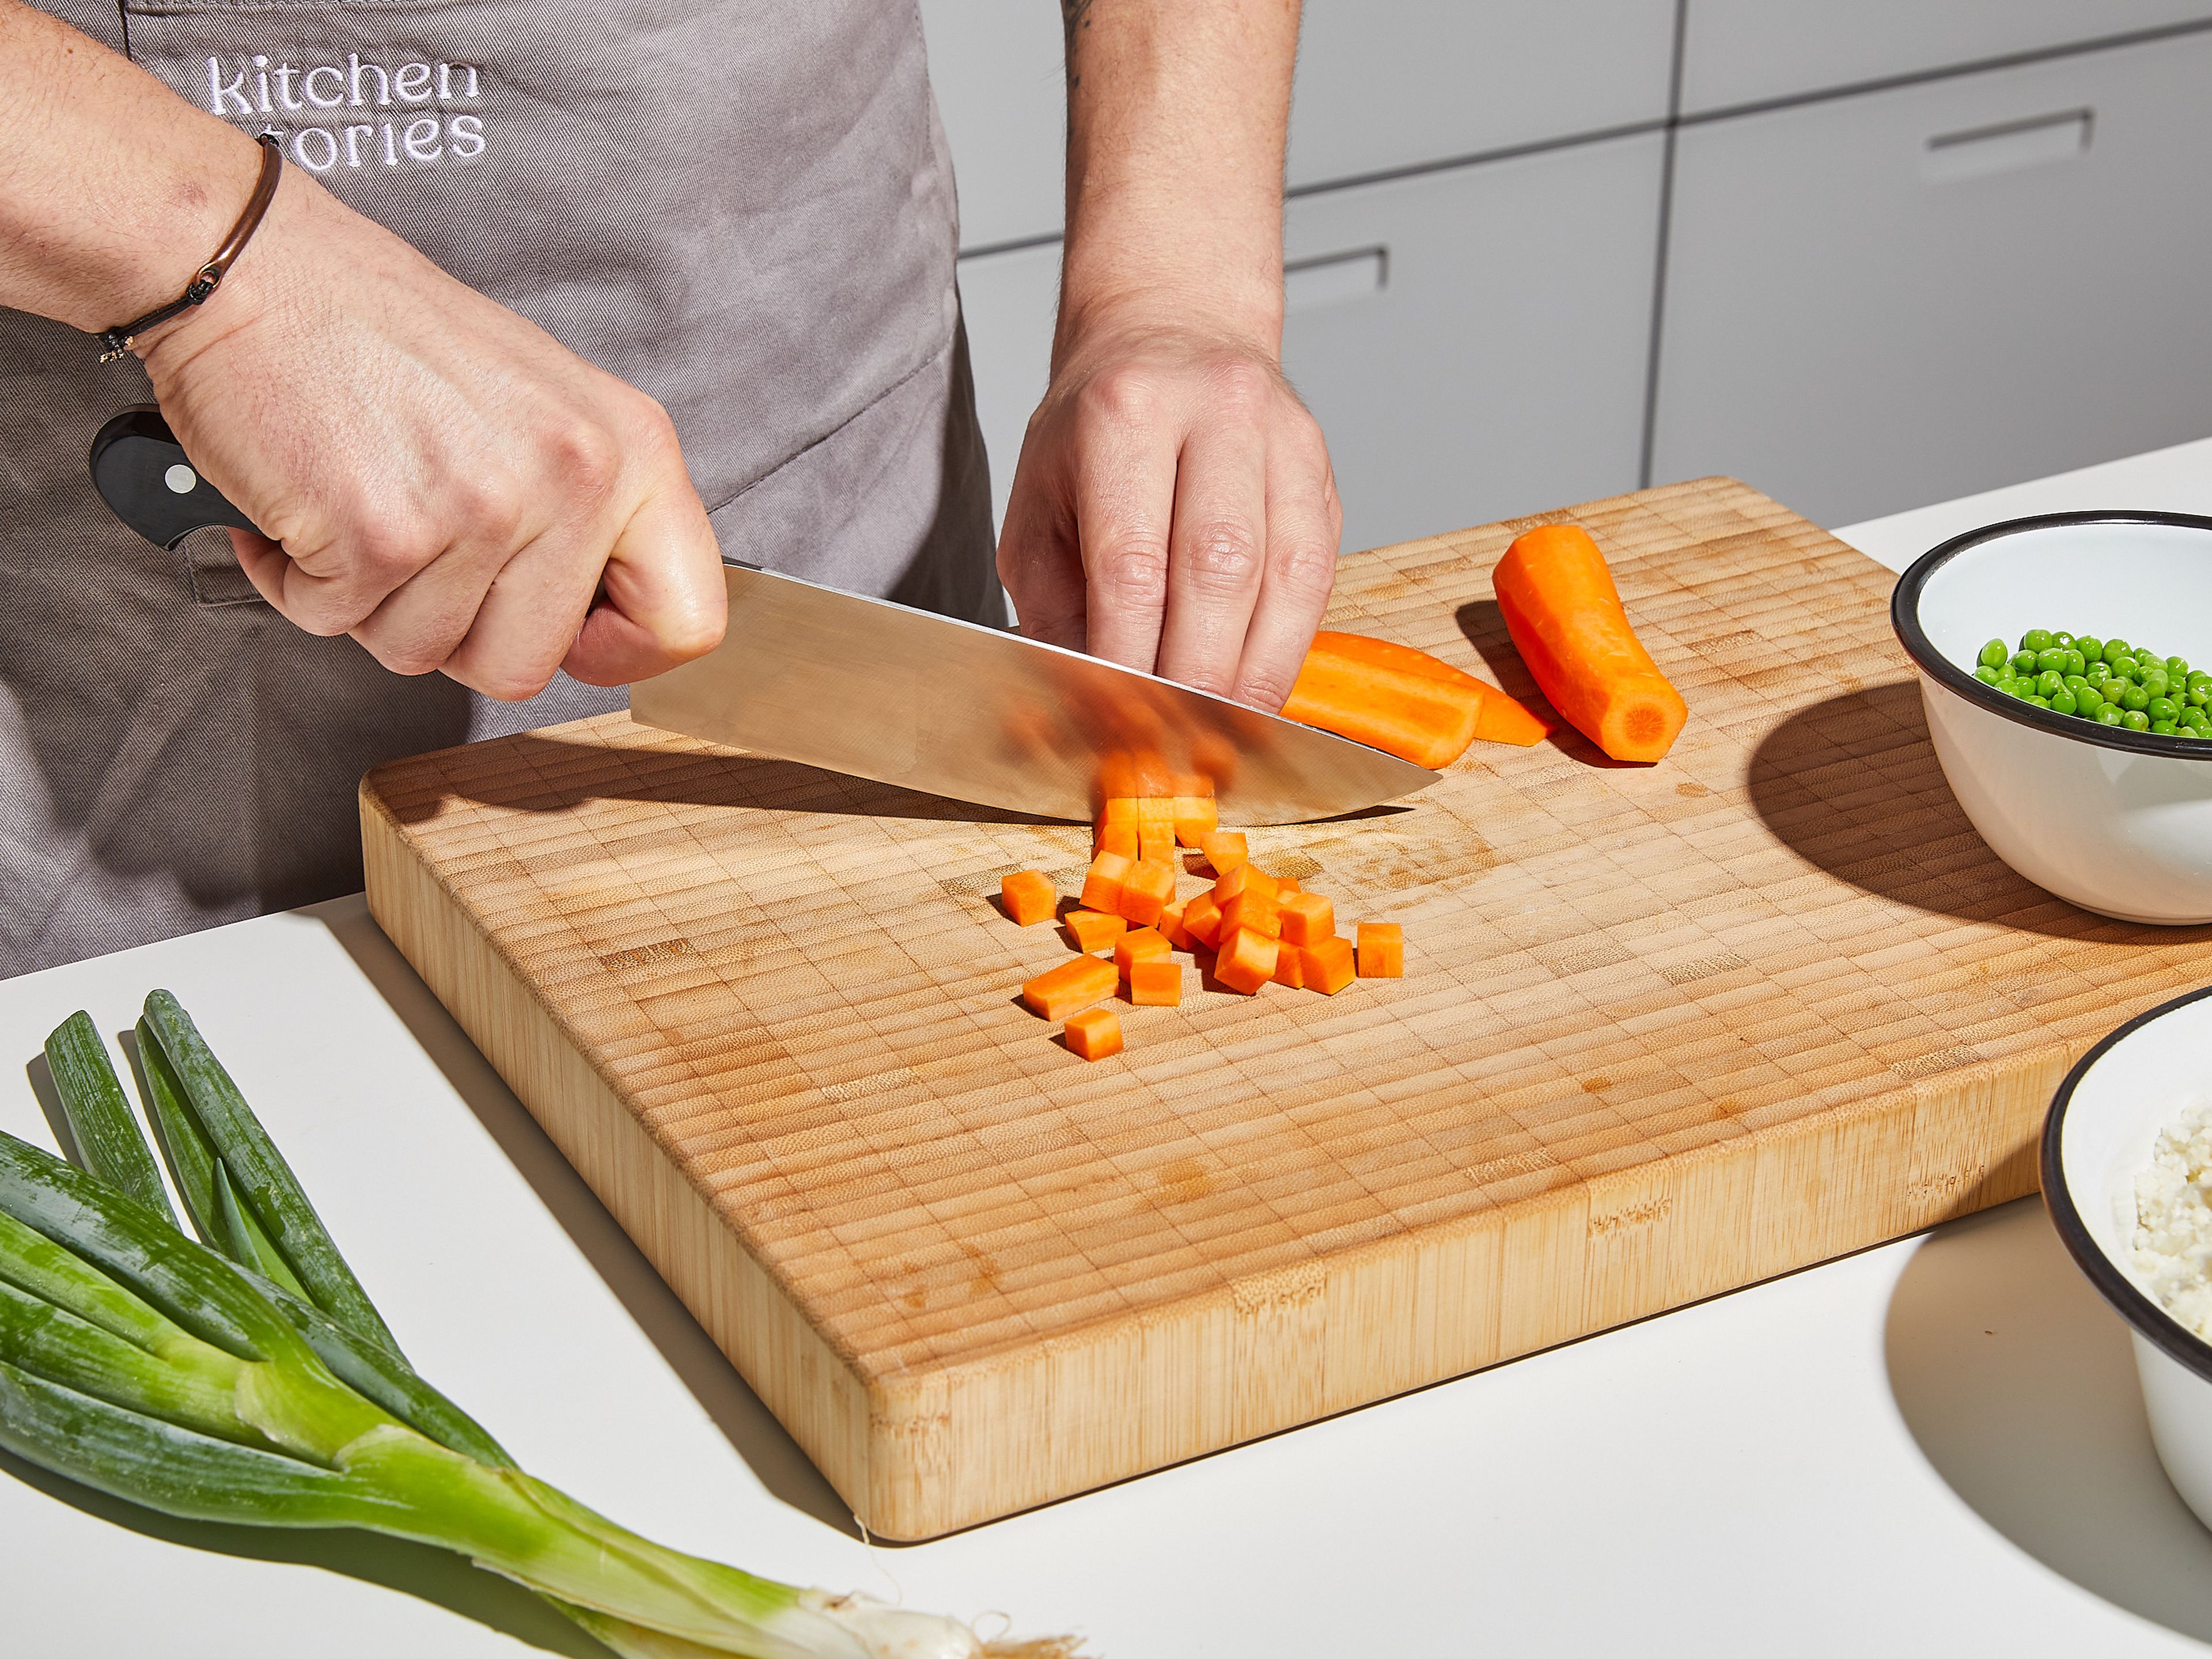 In the meantime, peel the carrot and cut into small cubes. Peel and finely chop the onion and garlic. Cut scallions into fine rings, and separate the white and green parts.